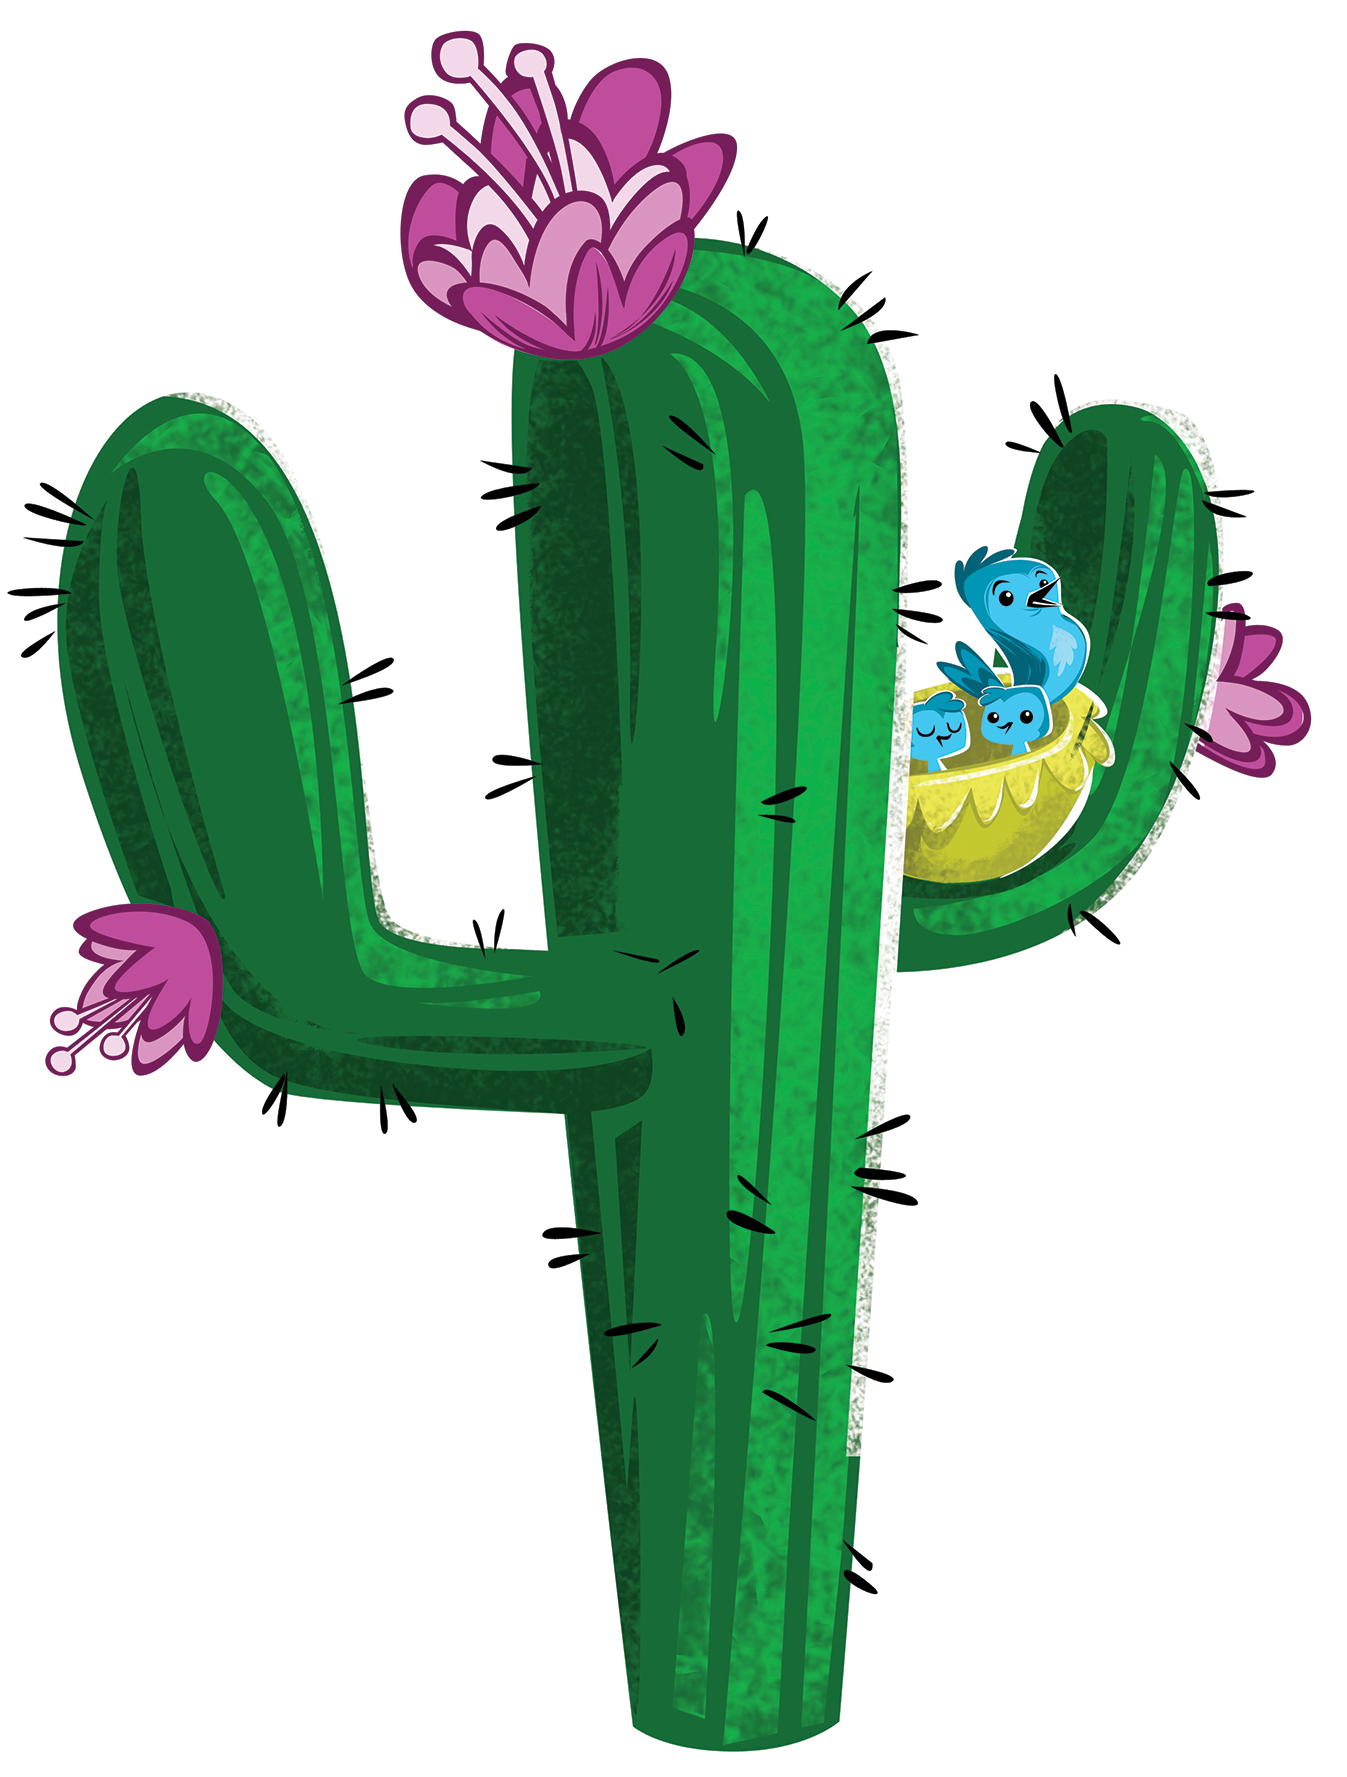 14 Cartoon Cactus   Free Cliparts That You Can Download To You